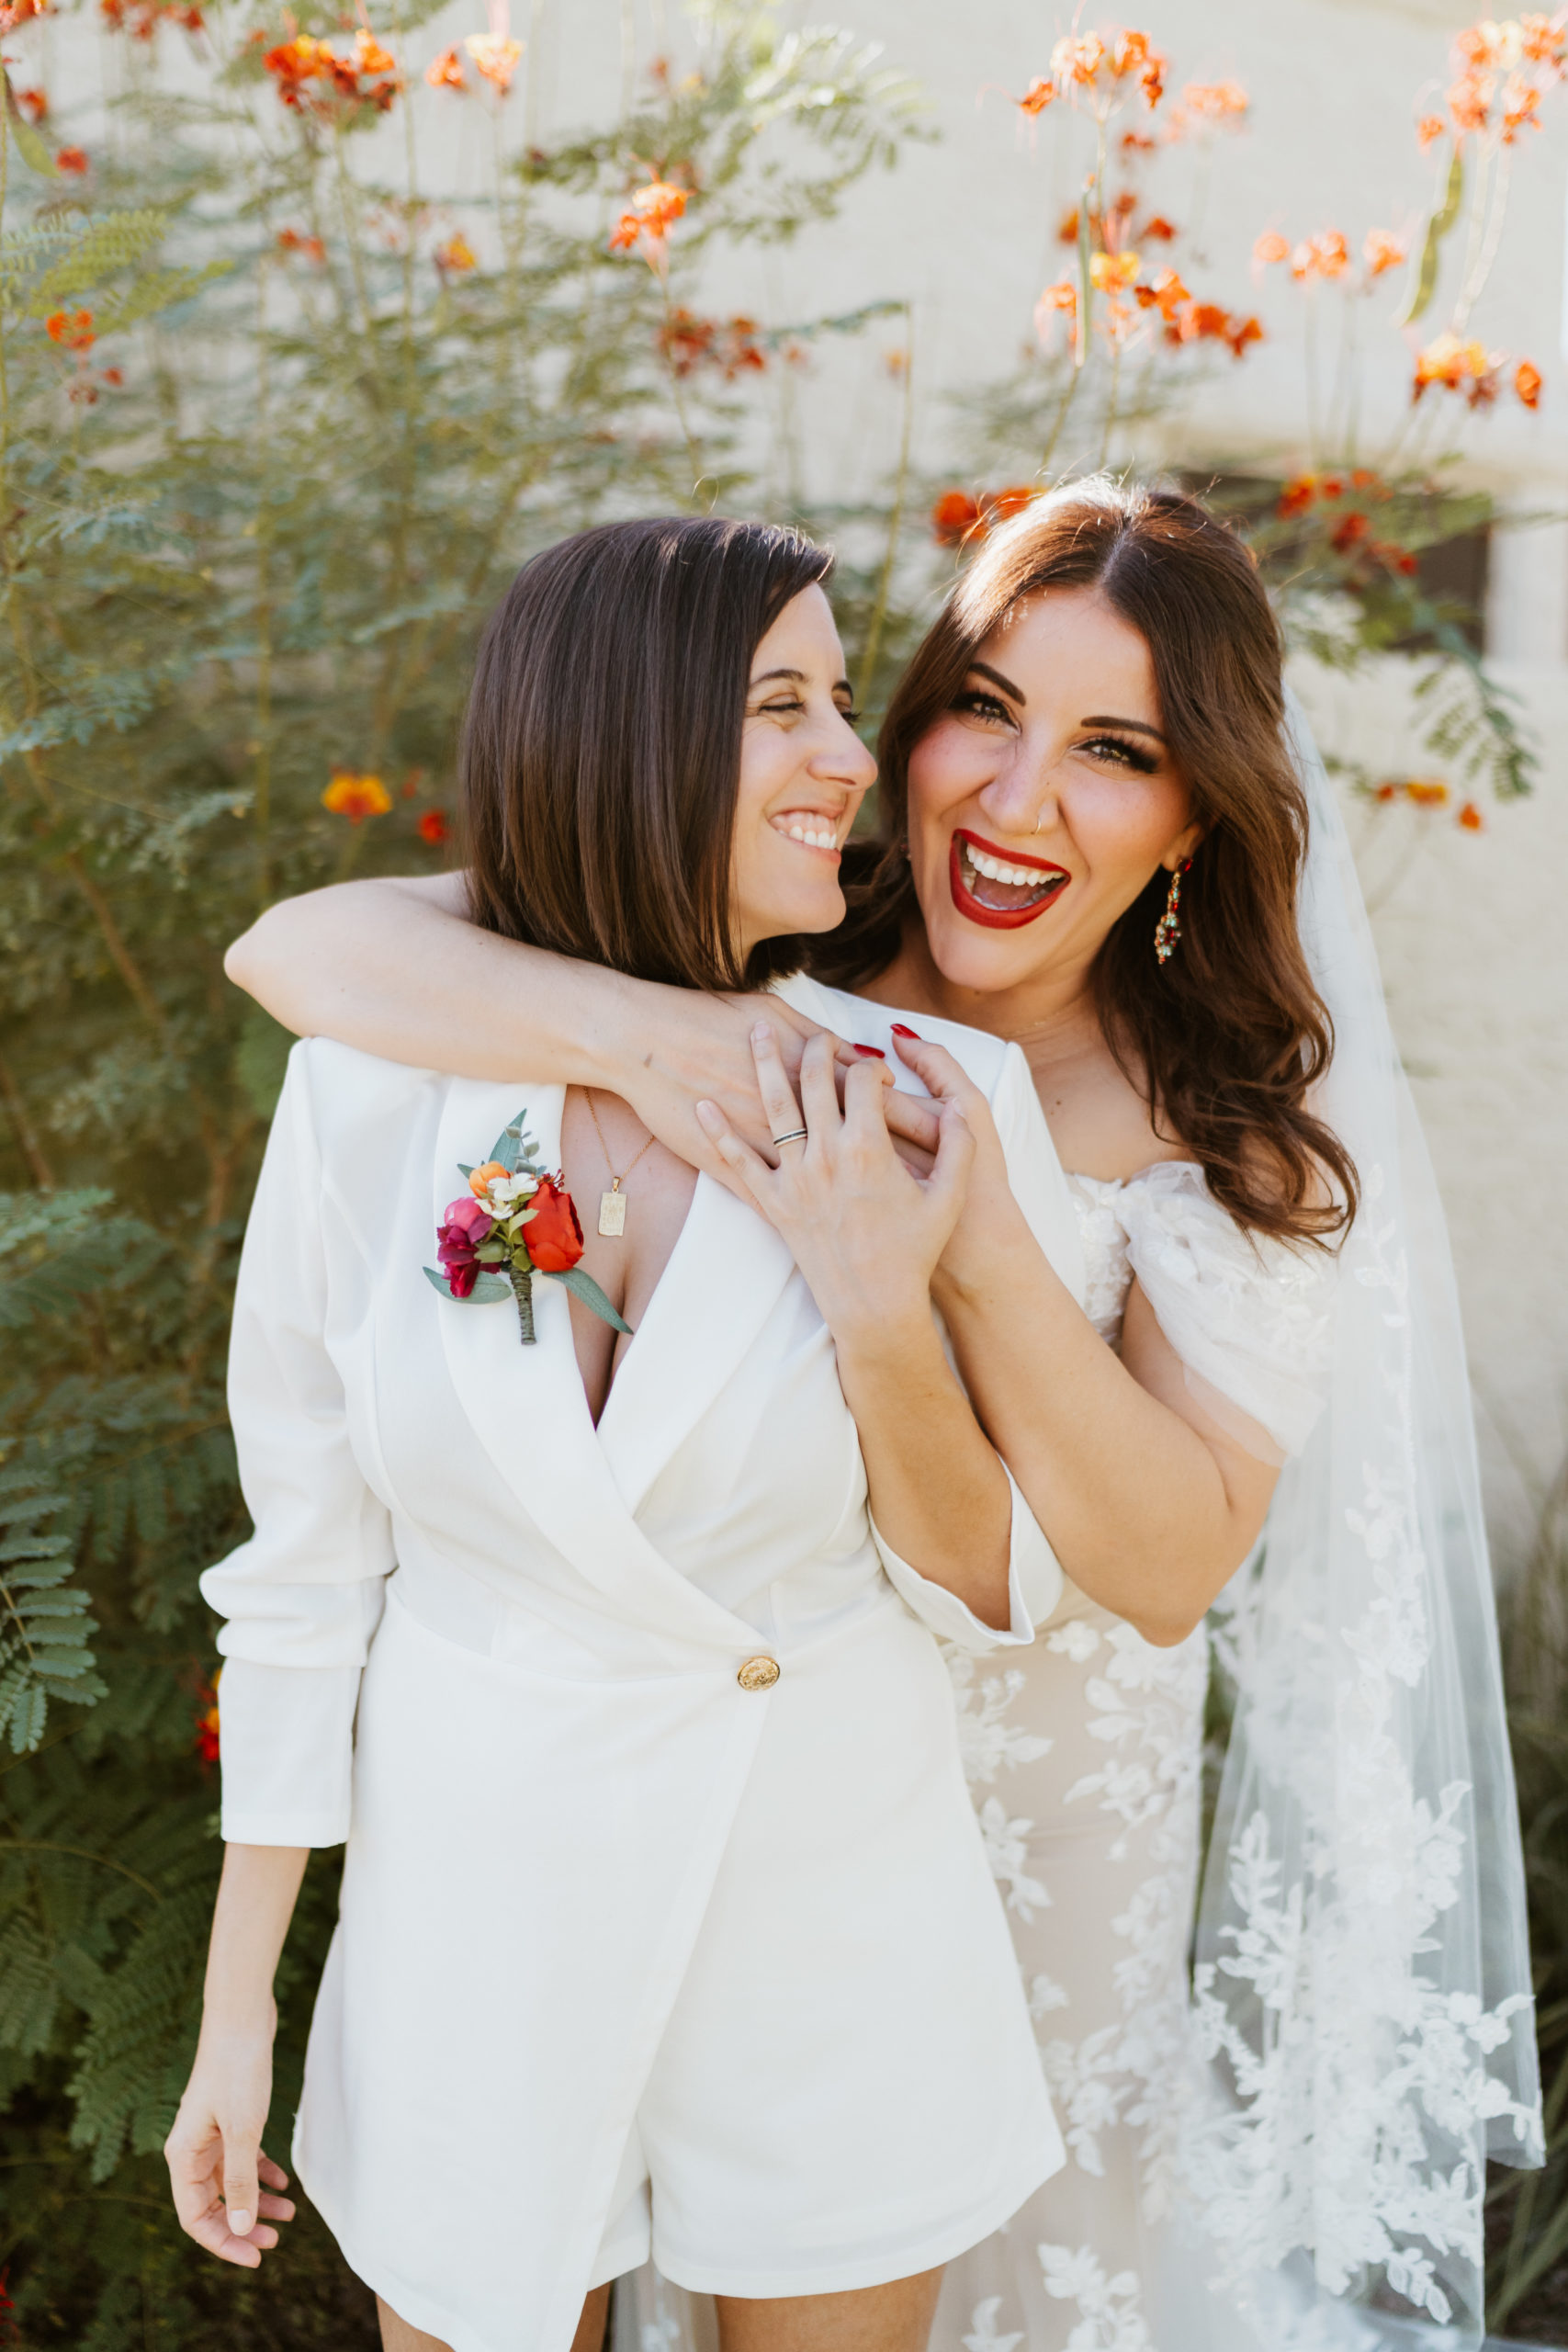 Two brides embracing each other facing toward the cameras